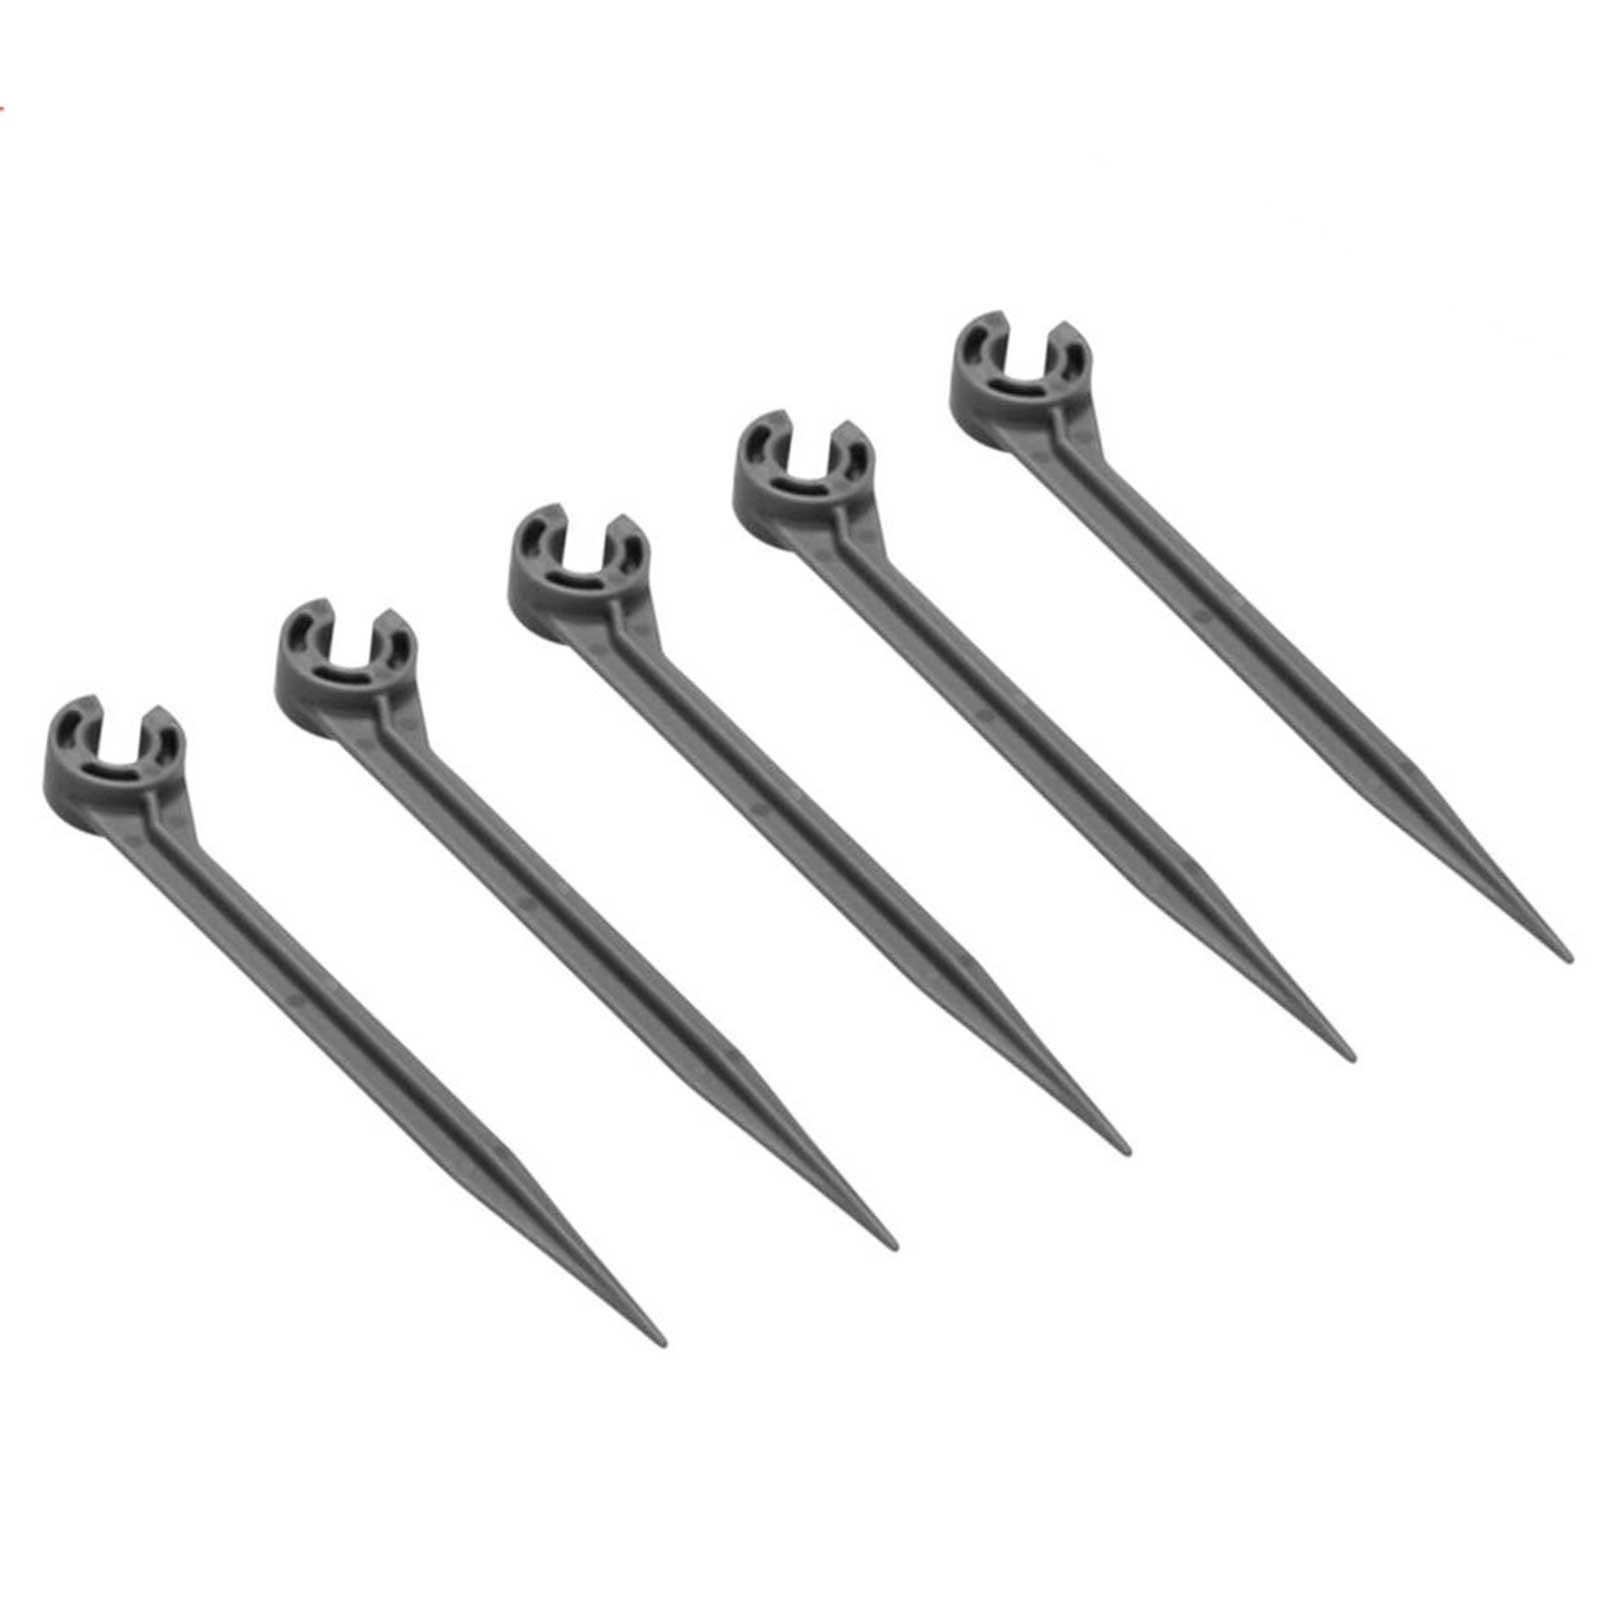 Photos - Other for Irrigation GARDENA MICRO DRIP Pipe Pegs 3/16" / 4.6mm Pack of 15 13218-20 